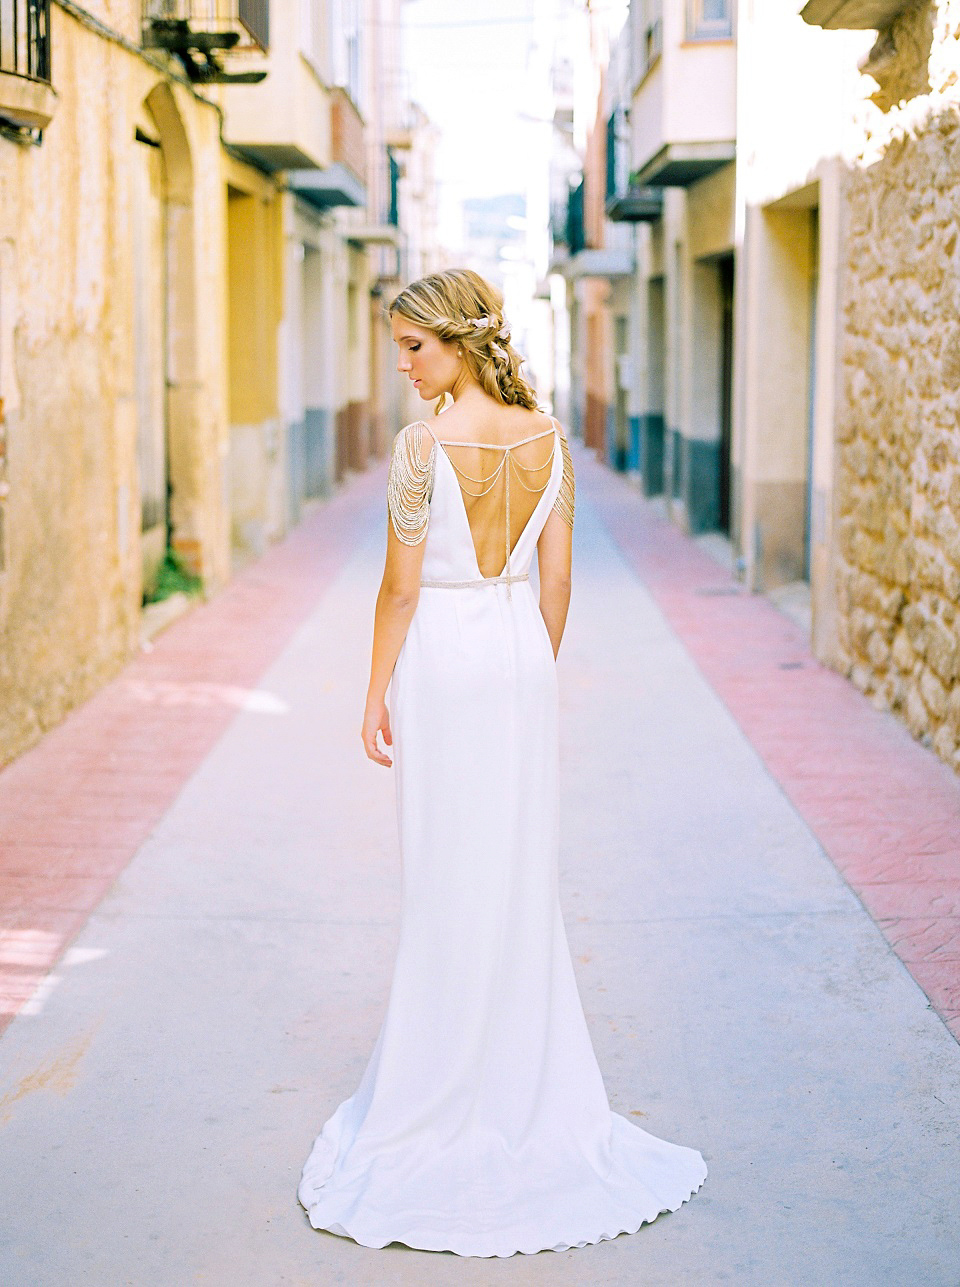 Luella's Bridal - the home of effortless bridal style in London.